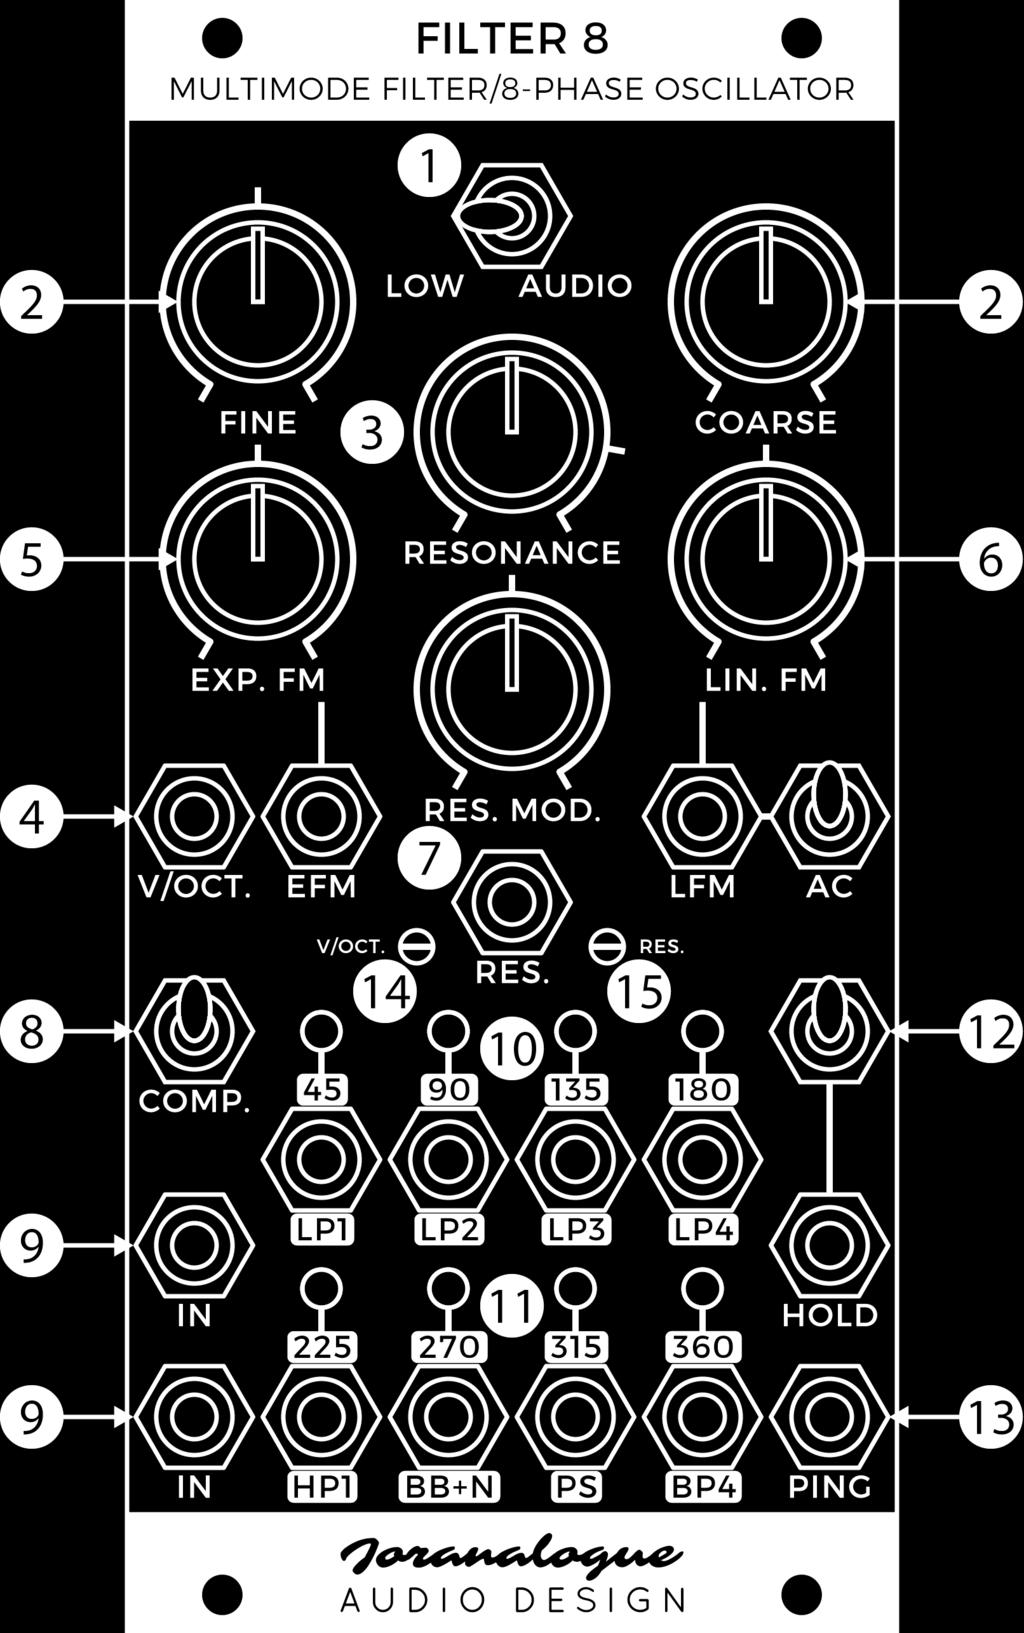 The fine knob s range is 5 % of the coarse knob (6 semitones in audio mode). In low frequency mode, the total range is 2.8 mhz (a period of 6 minutes) to 180 Hz, with 1 Hz when both knobs are centred.